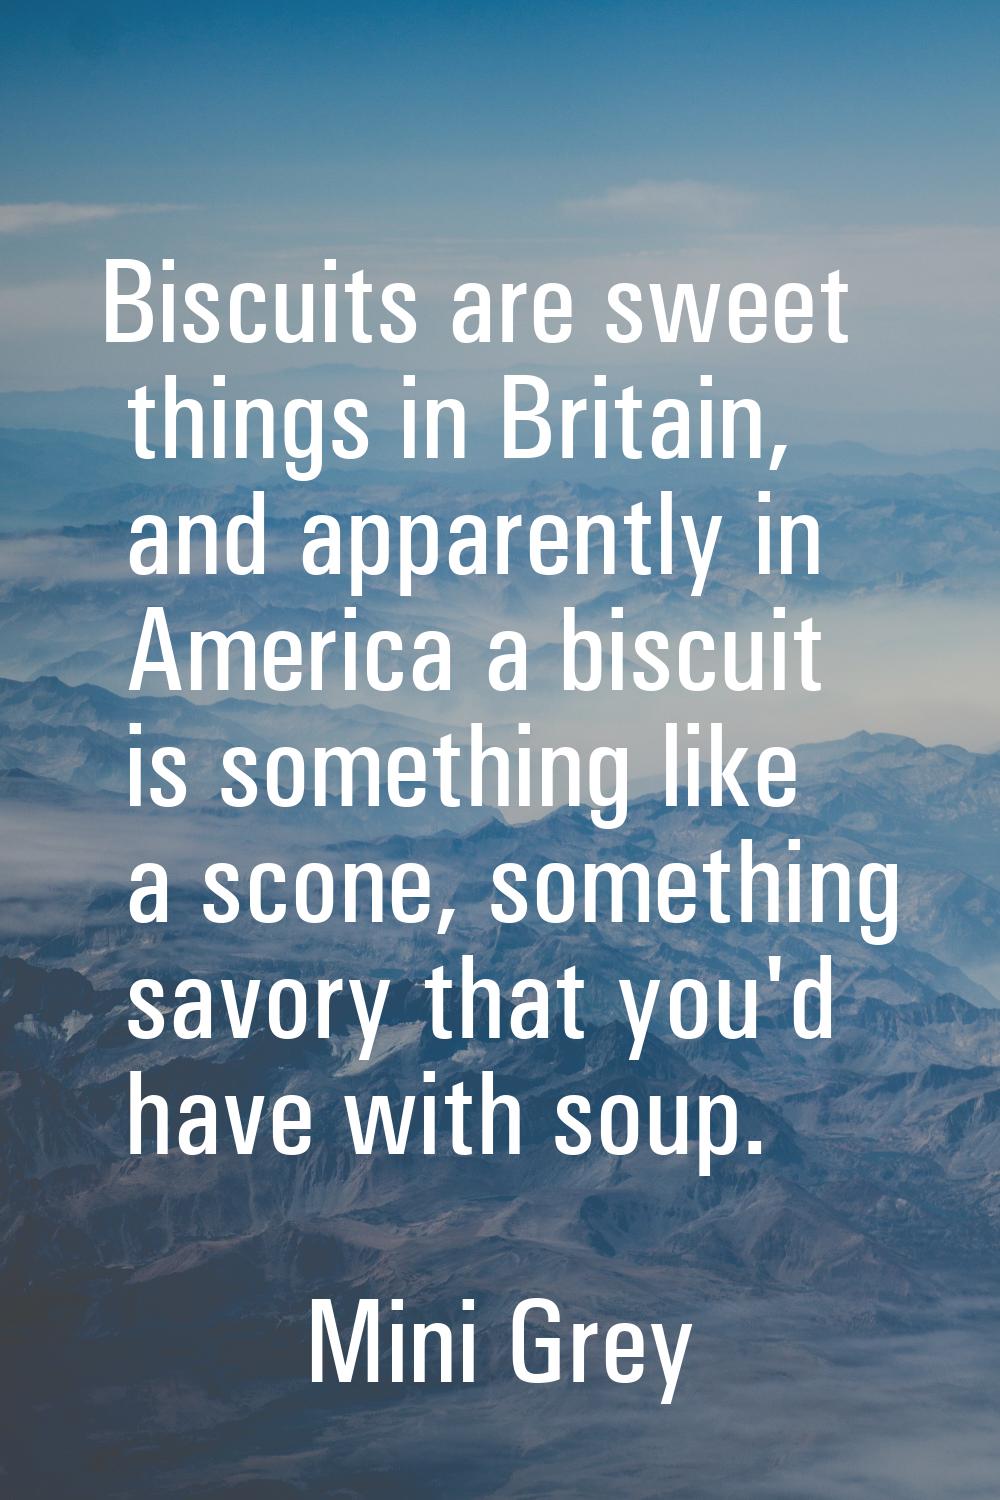 Biscuits are sweet things in Britain, and apparently in America a biscuit is something like a scone